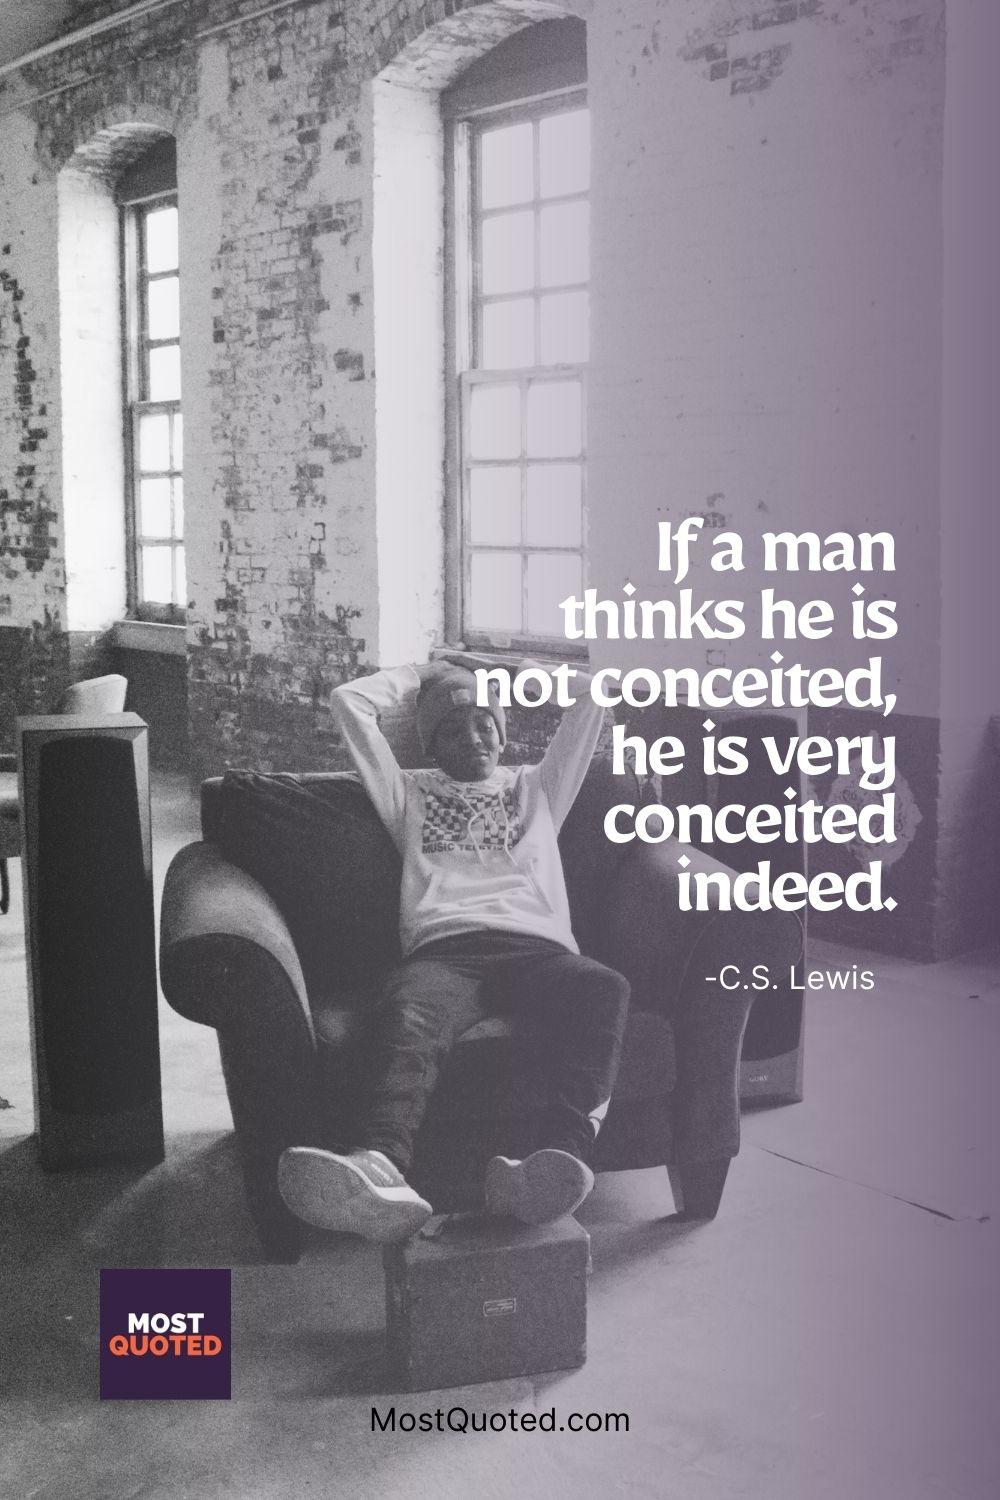 If a man thinks he is not conceited, he is very conceited indeed. - C.S. Lewis